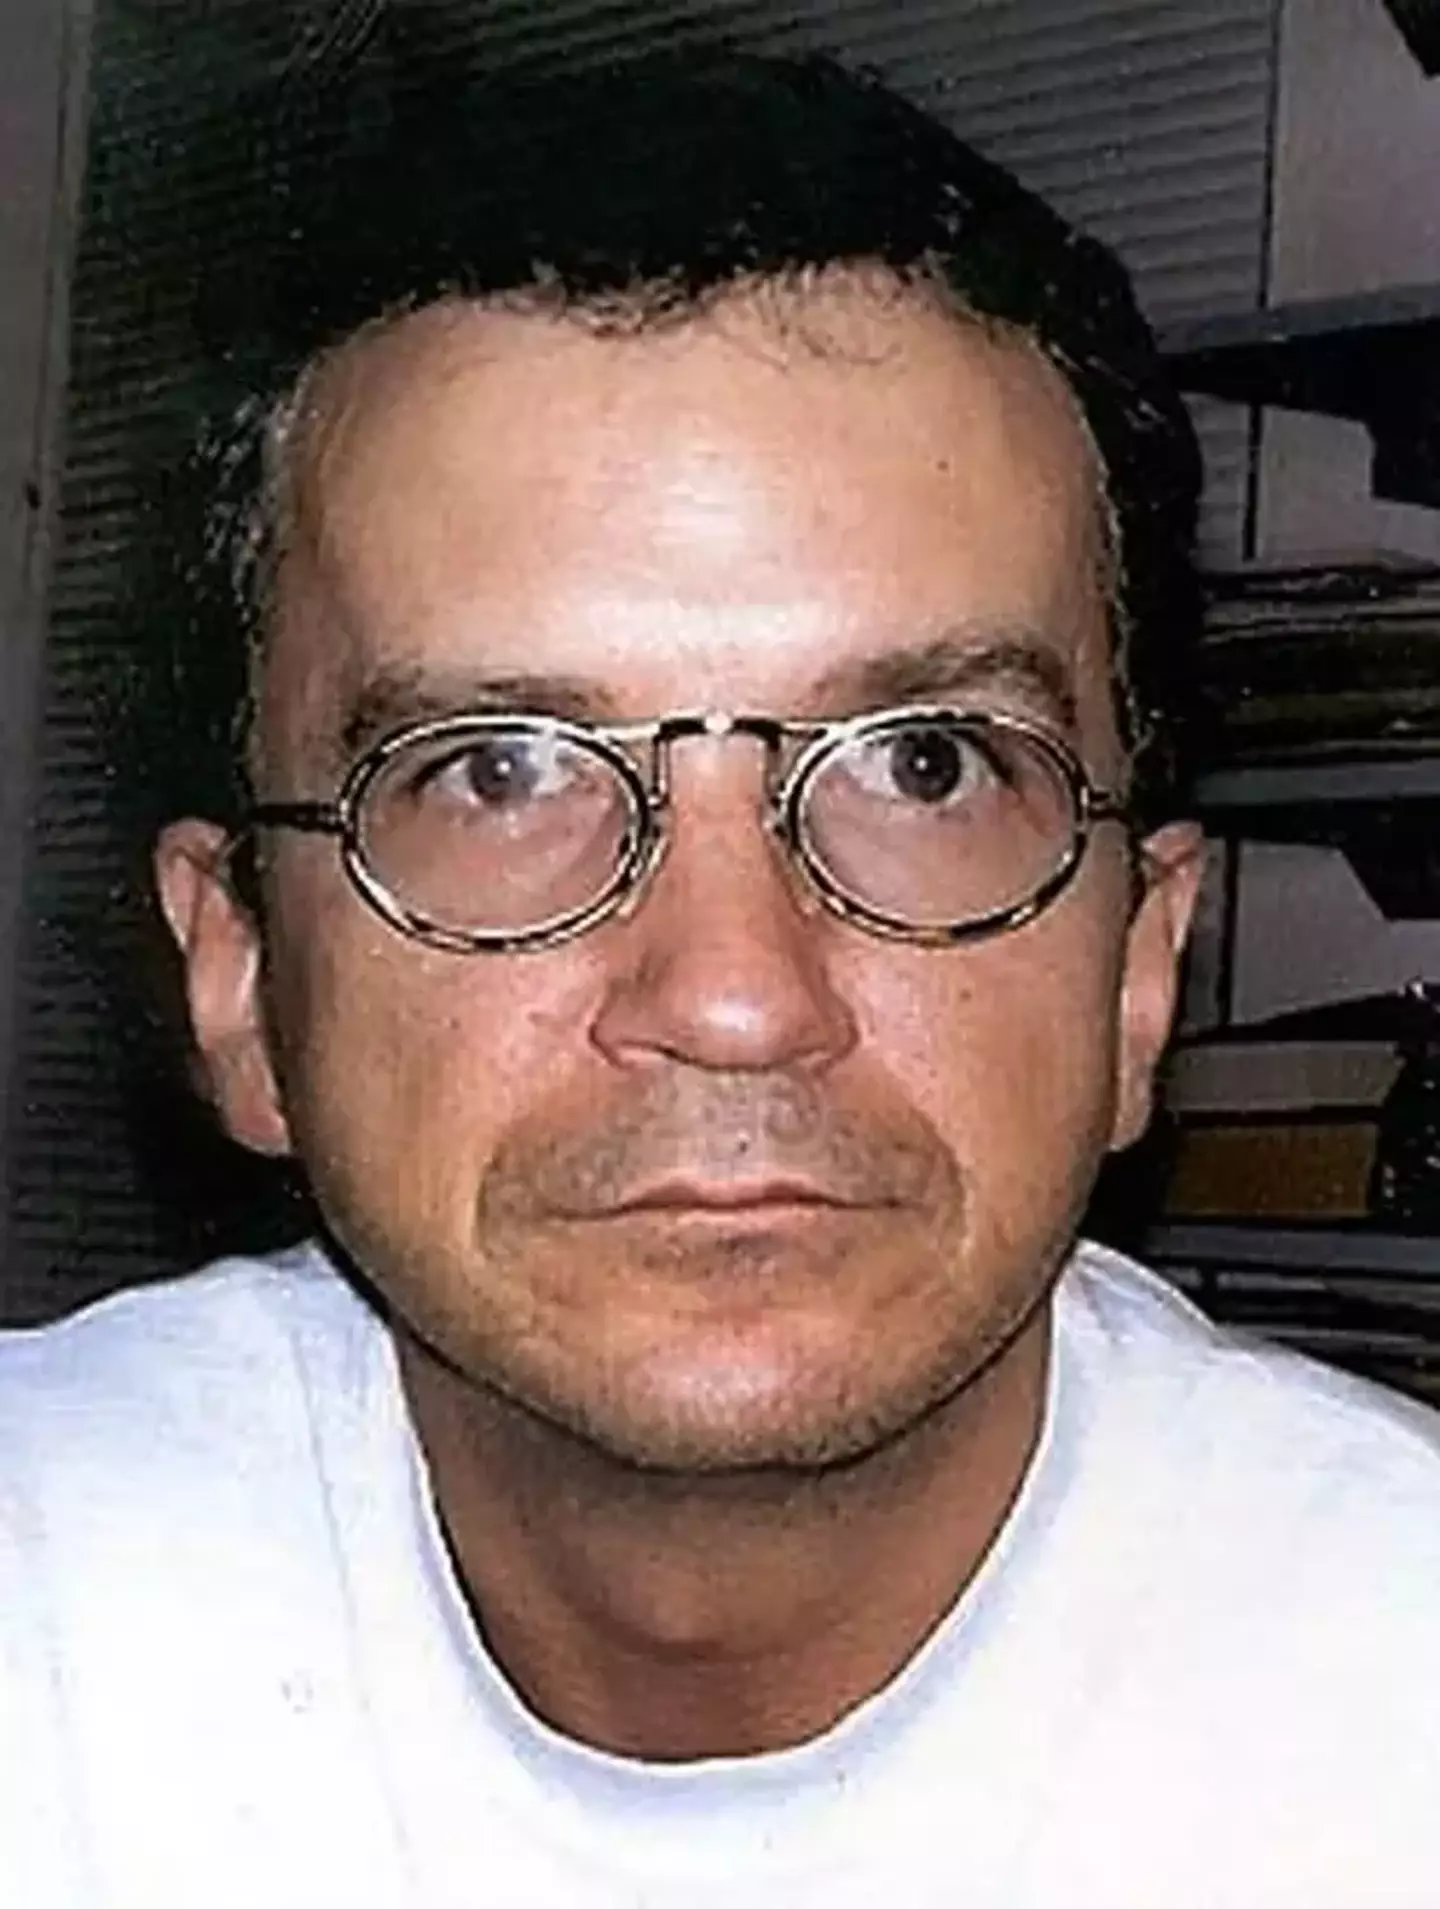 Bernd Brandes (pictured) was eaten by the German cannibal.